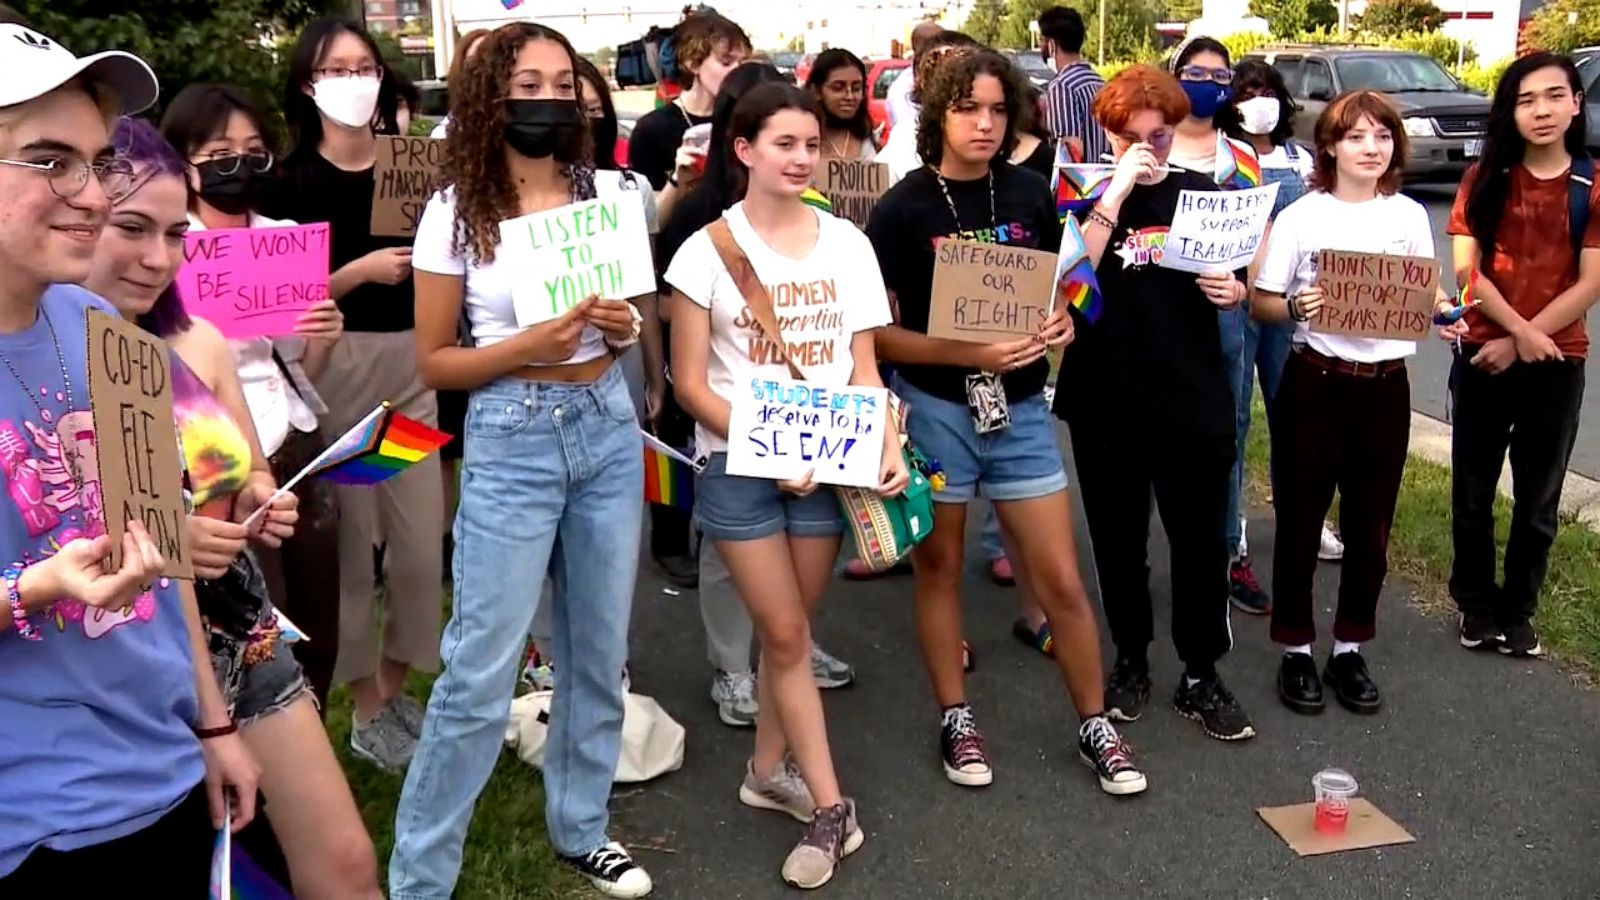 Hd Popcorn American Sex Vuedioes - Virginia students protest for sex ed reform - Good Morning America